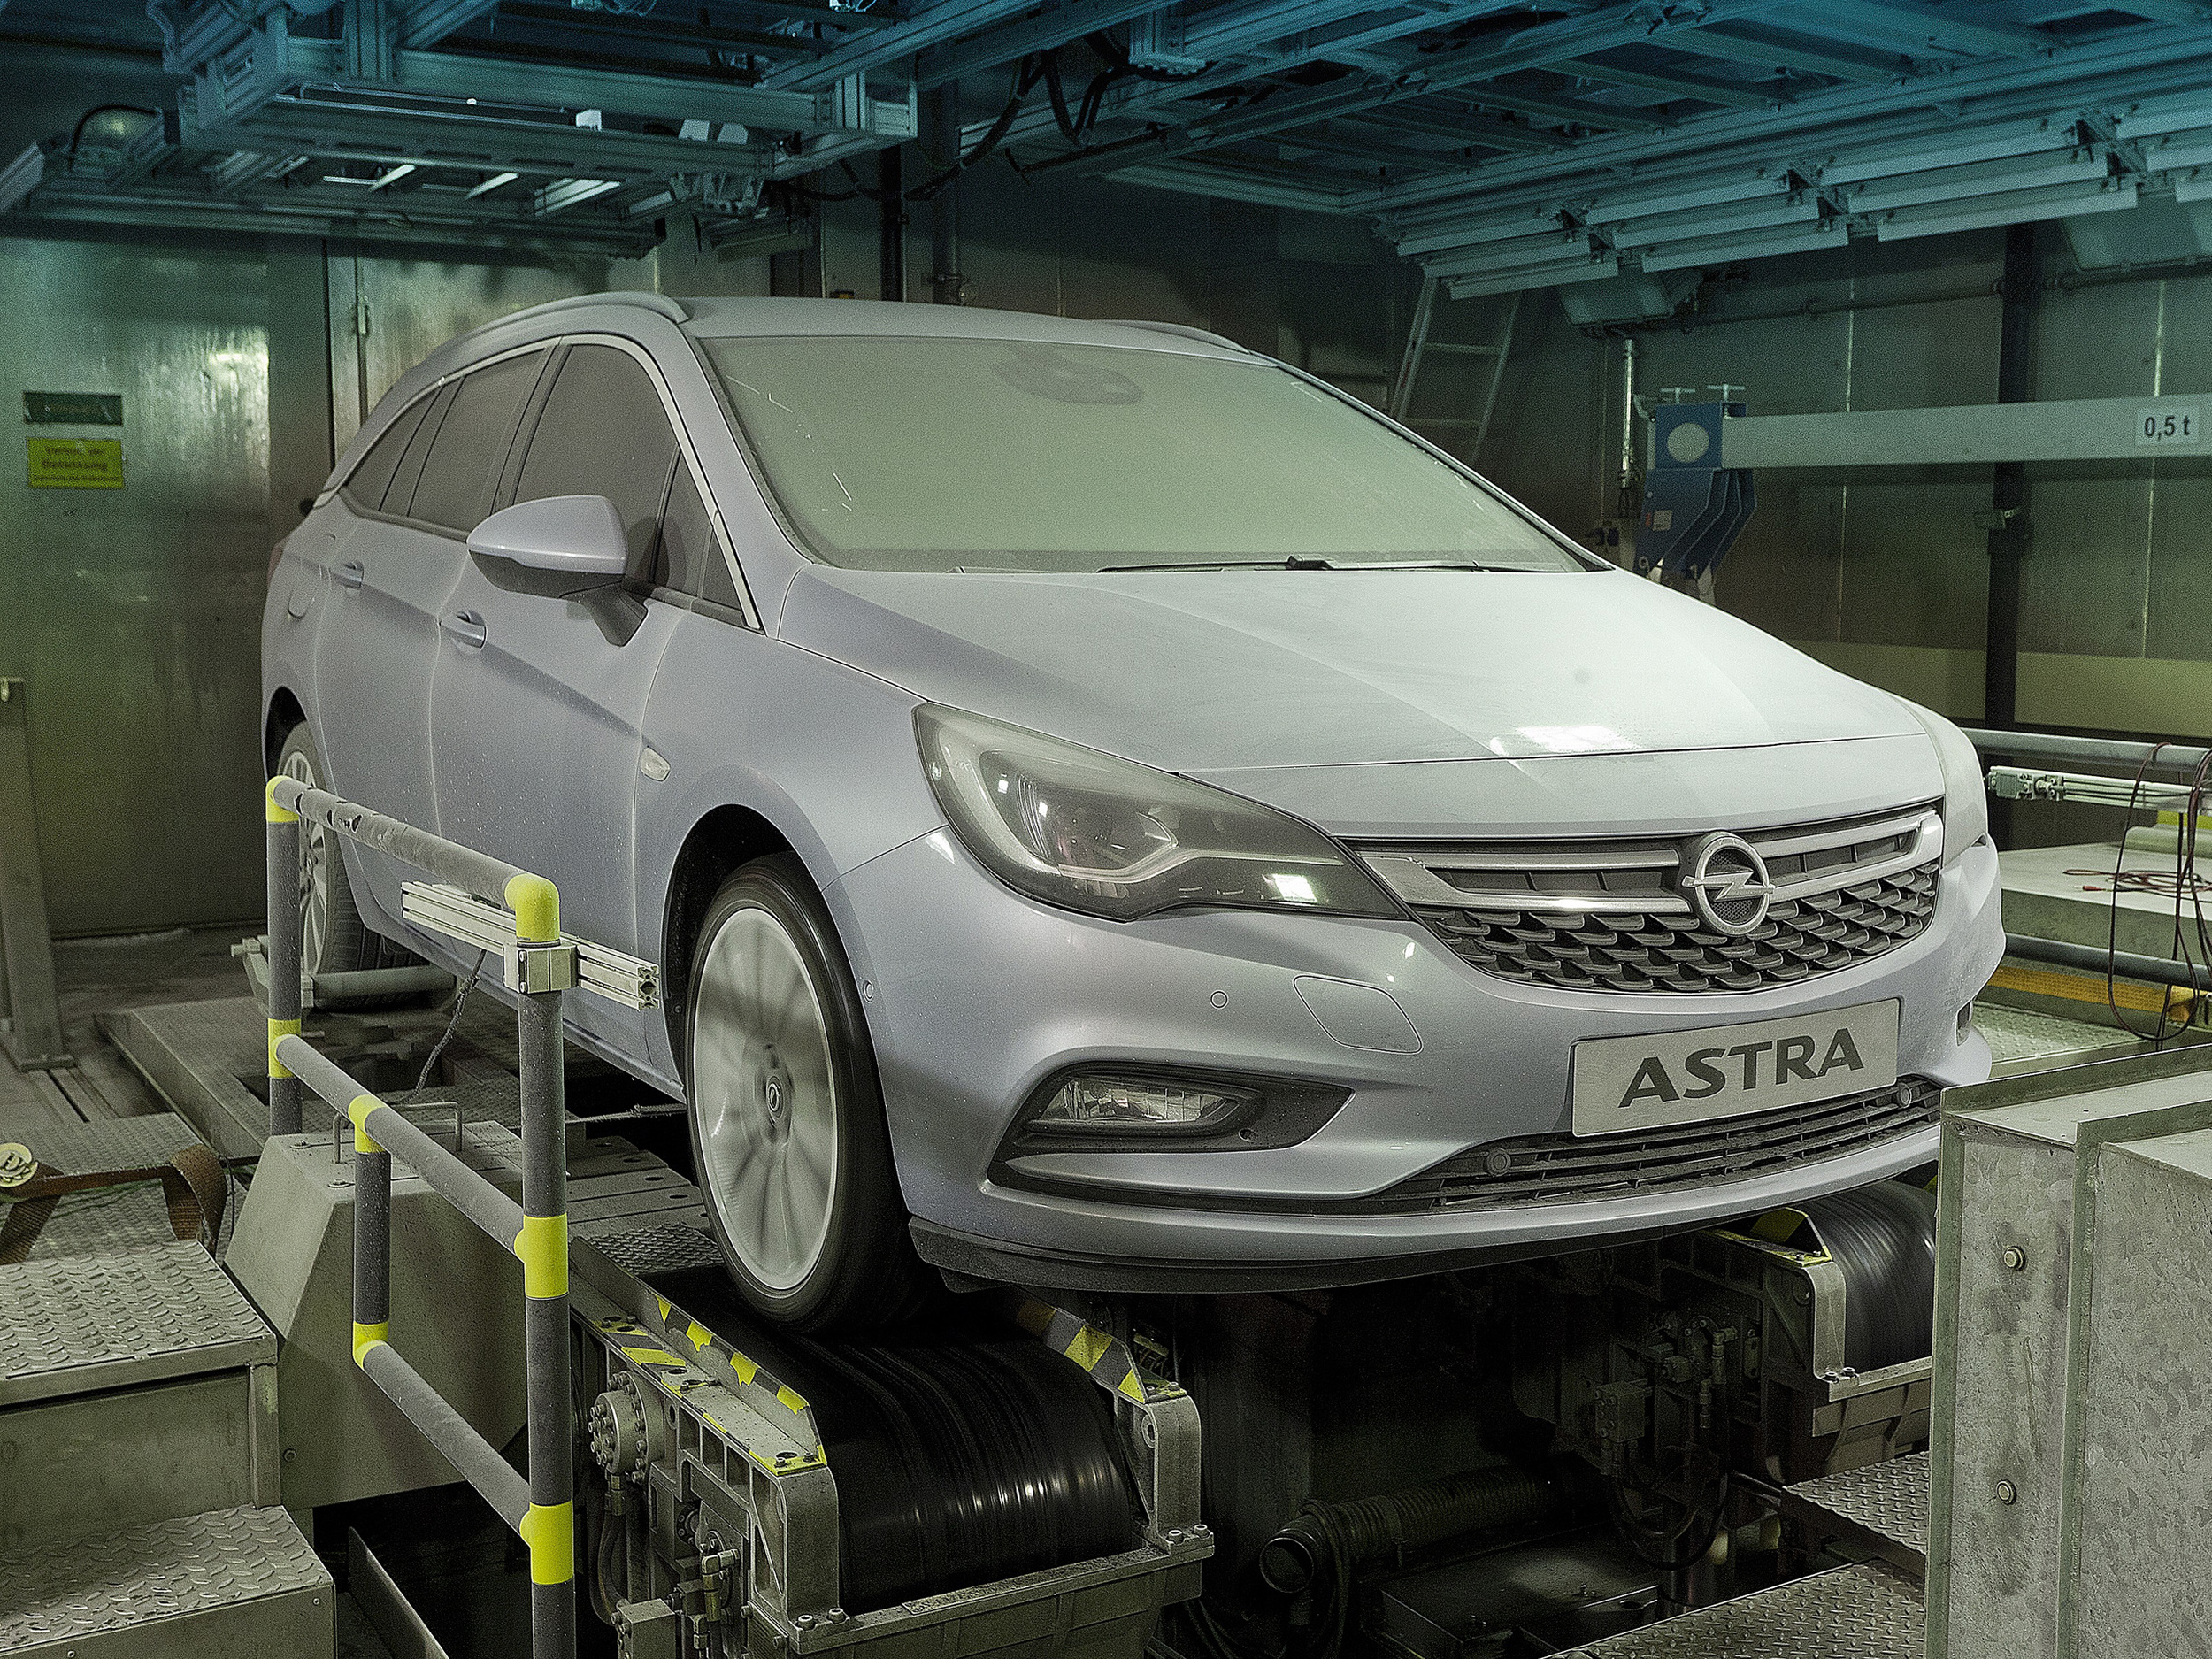 Opel-Astra-Sports-Tourer-Climatic-Test-Chamber-299046.jpg